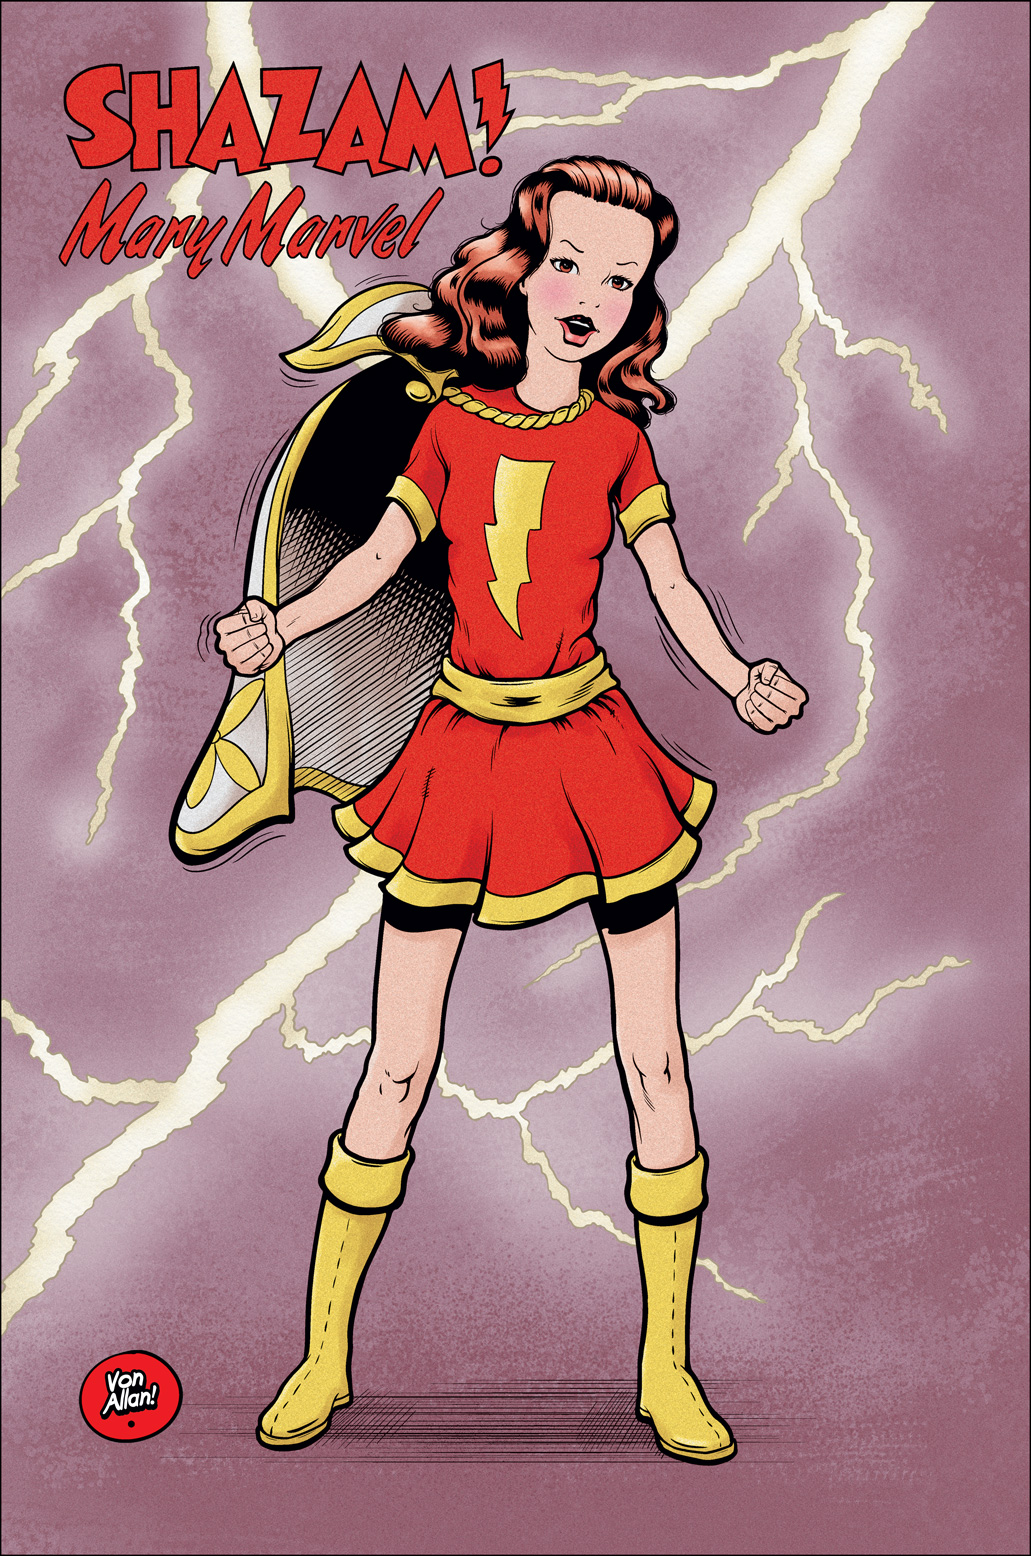 Mary Marvel at approximately 13 years of age by illustrator Von Allan